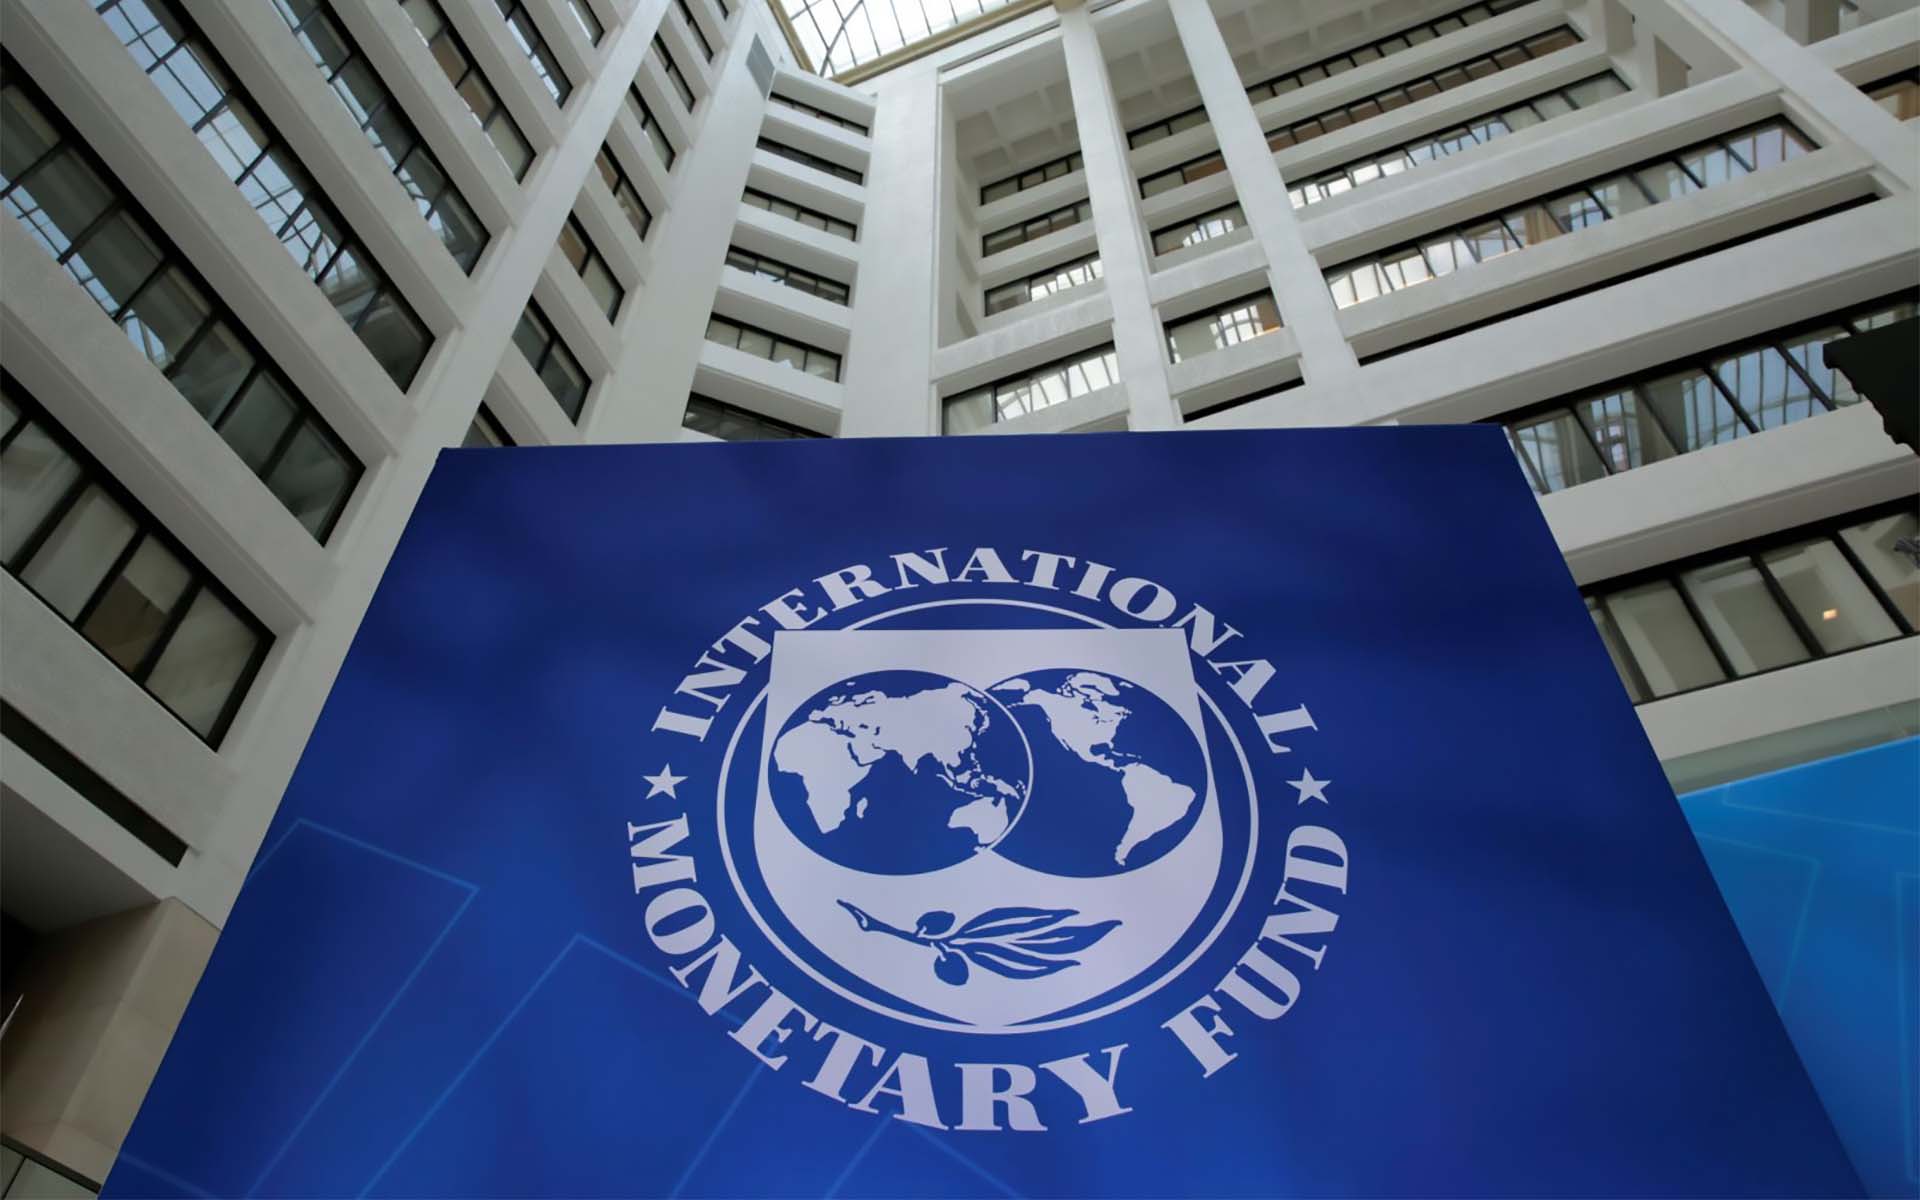 EU member states must break with IMF's punitive loan fees - EuroMed Rights